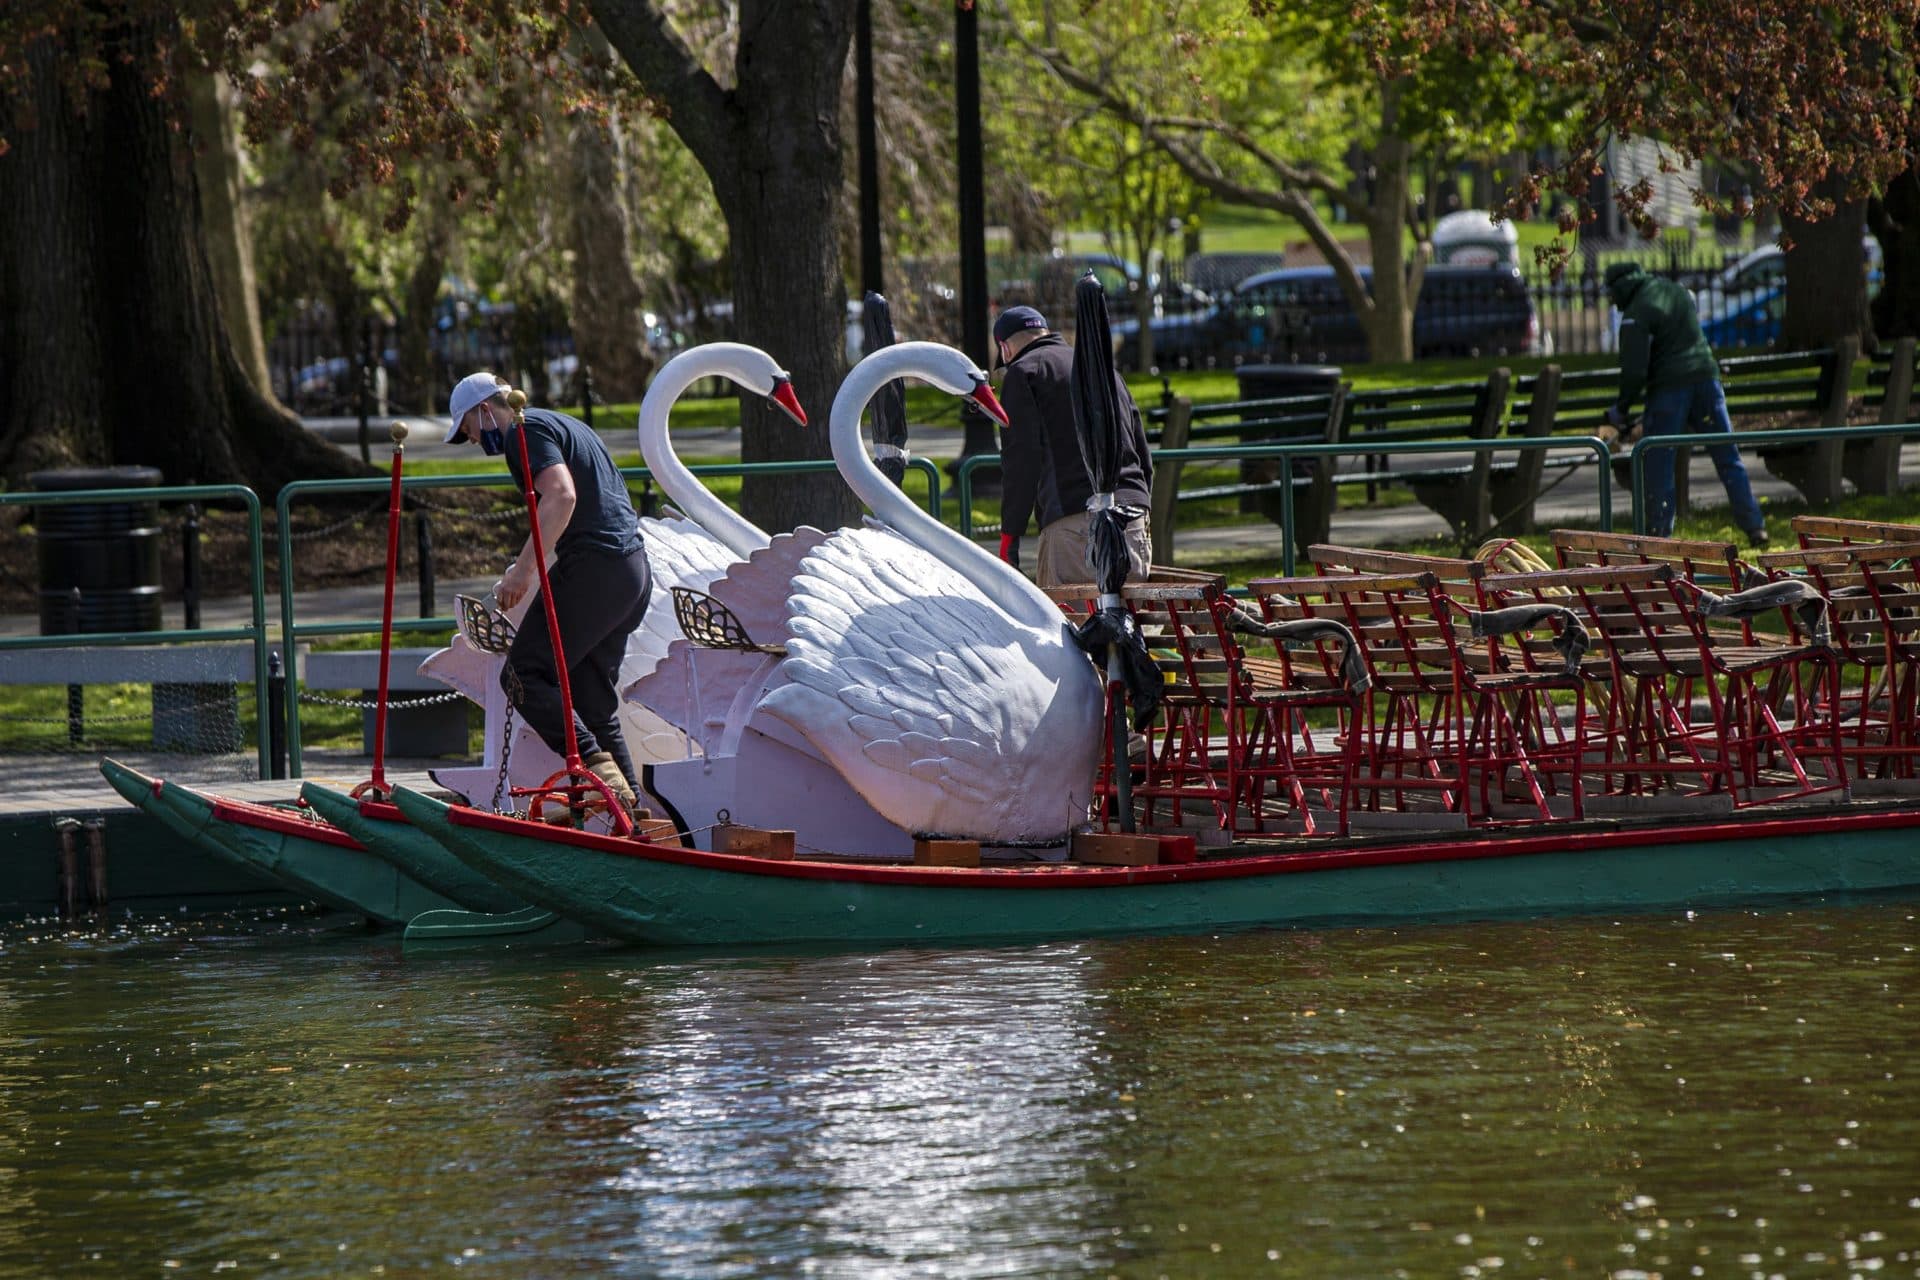 The second assembled swan boat is docked with the first. (Jesse Costa/WBUR)